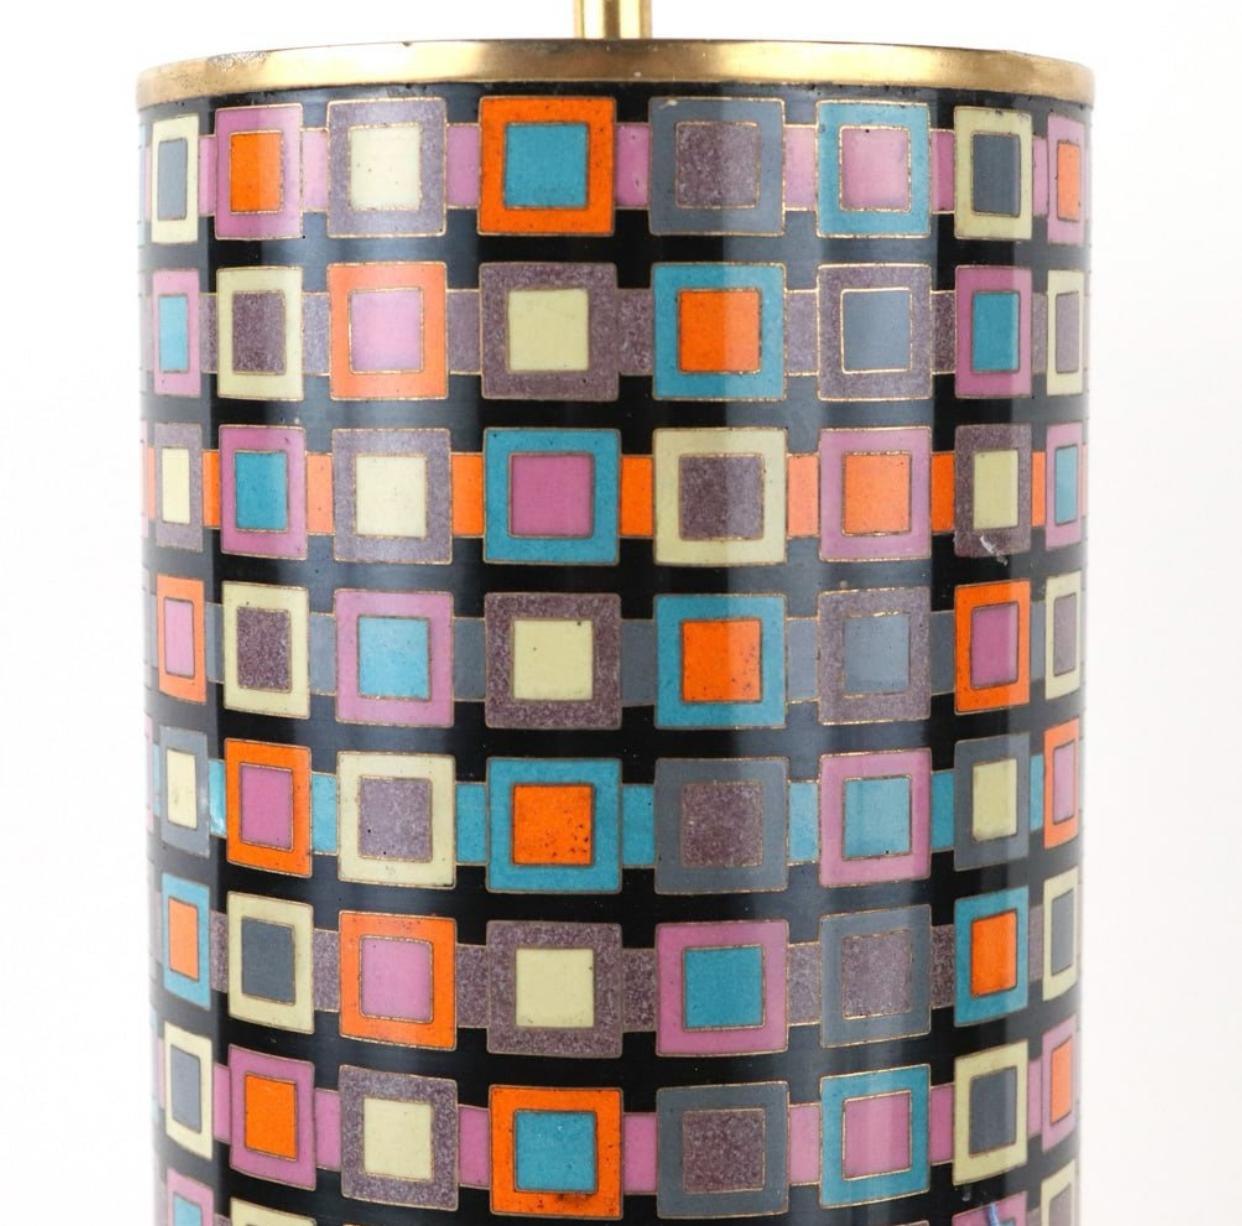 Tall cloisonné tower style table lamp in the manner of Fabienne Jouvin. Incredibly intricate, geometric patterned, enamel and brass construction. The cloisonné is made by the ancient technique for metal decoration. The brass compartments are first